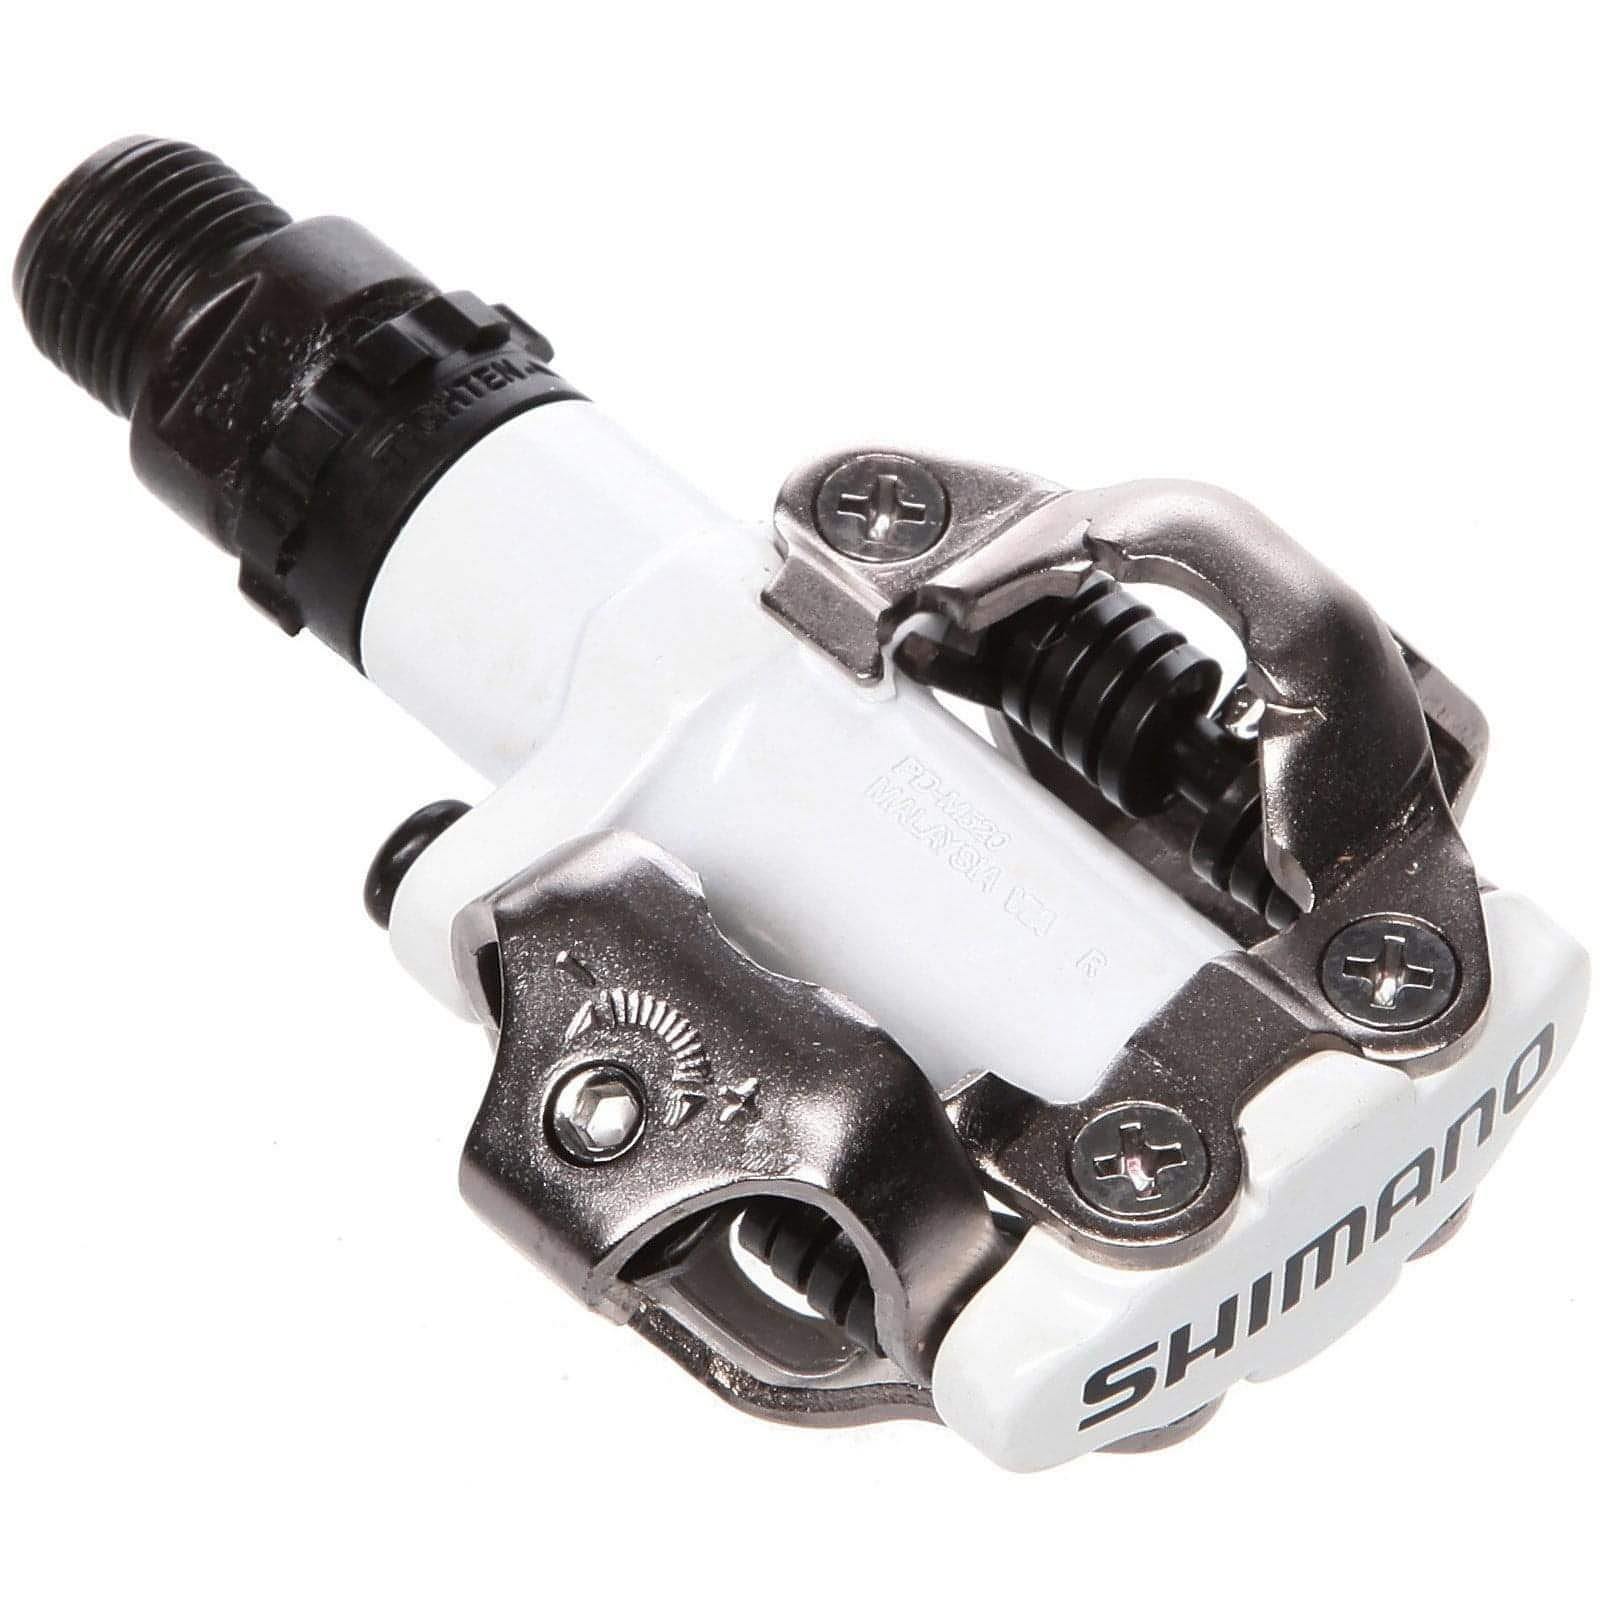 Shimano PD-M520 Pedals - White 4524667298915 - Start Fitness